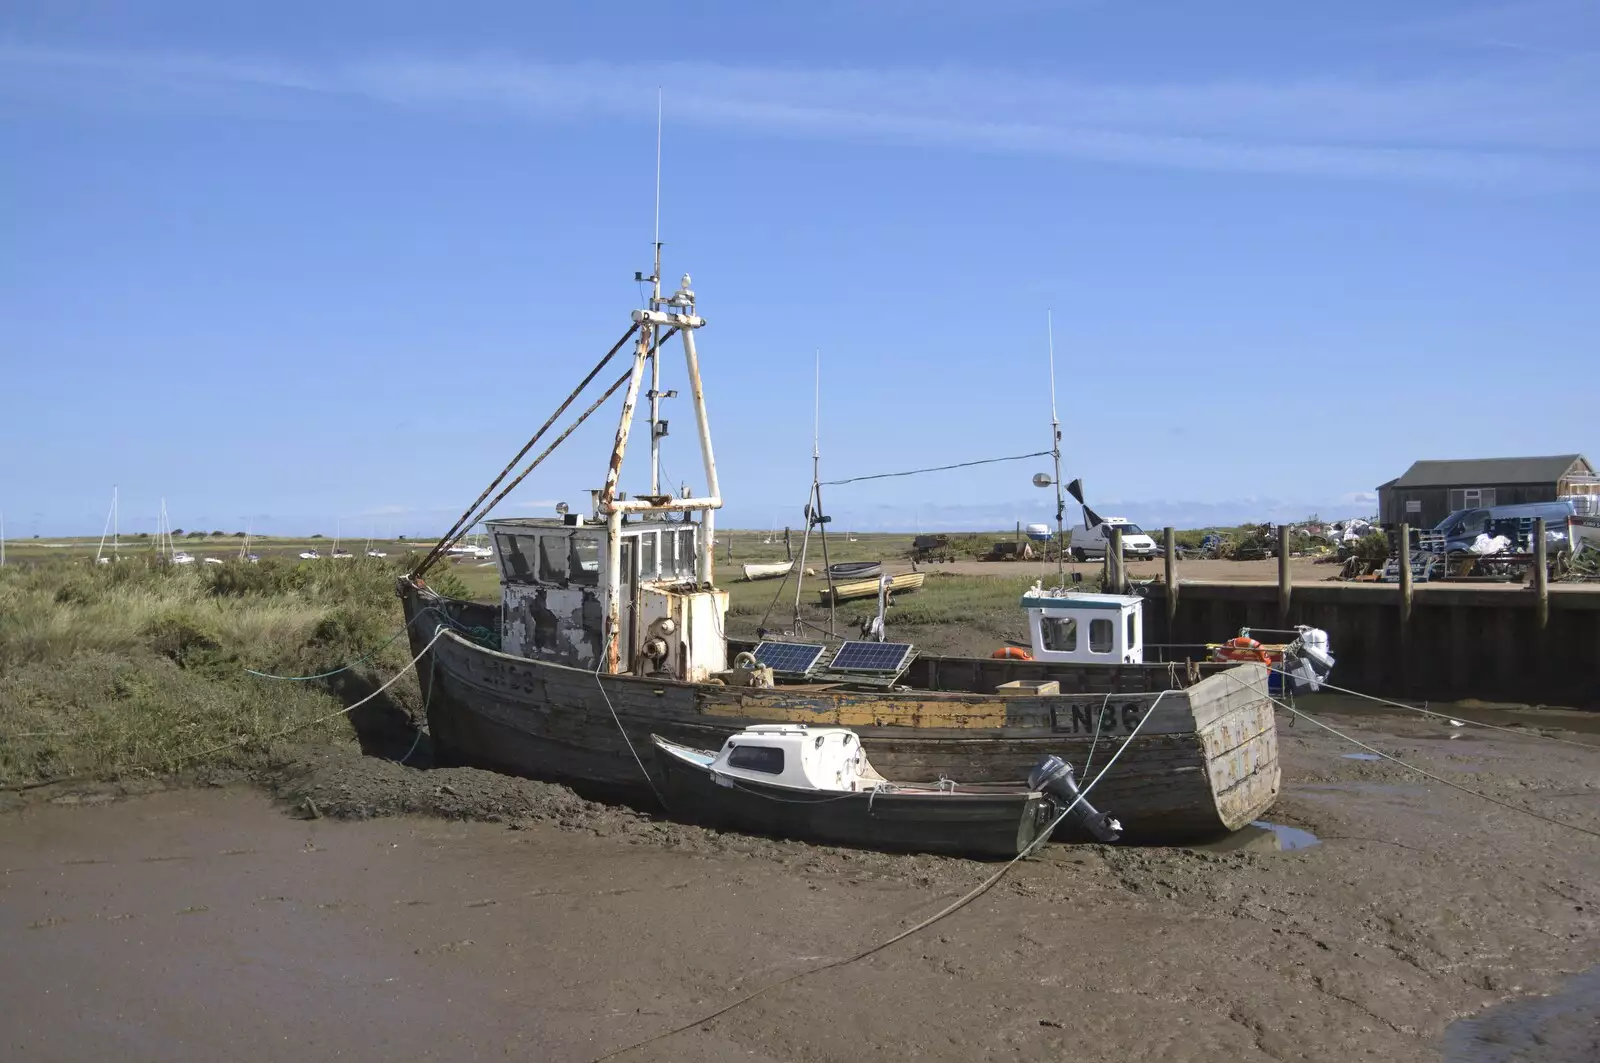 Derelict fishing boats, from Camping on the Edge at Snettisham Beach, Norfolk - 28th August 2023